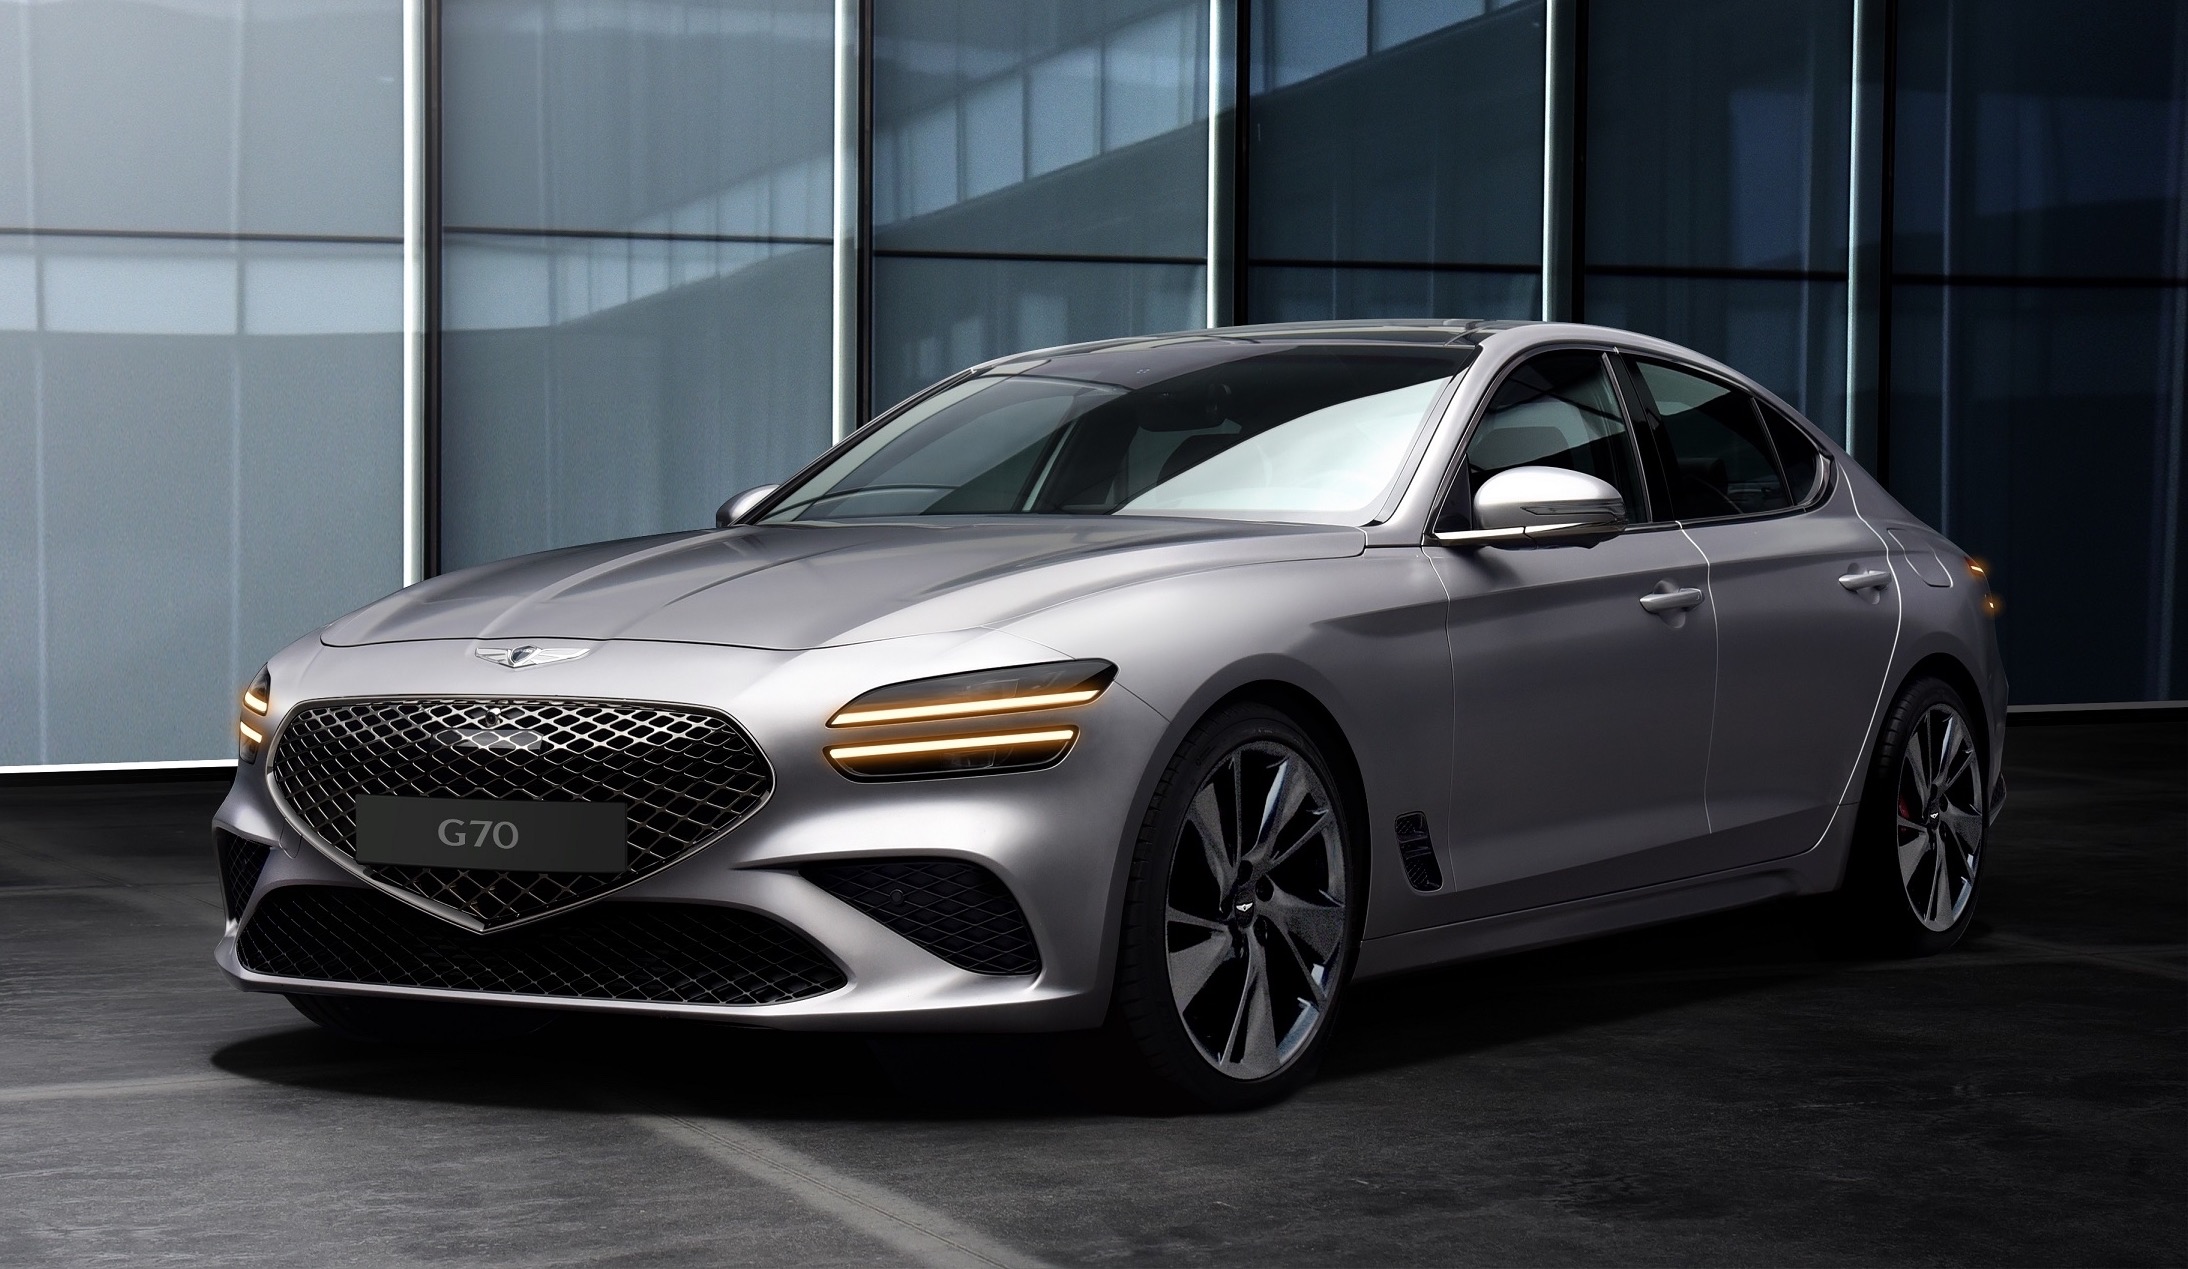 2021 Genesis G70 revealed with updated design and tech | PerformanceDrive